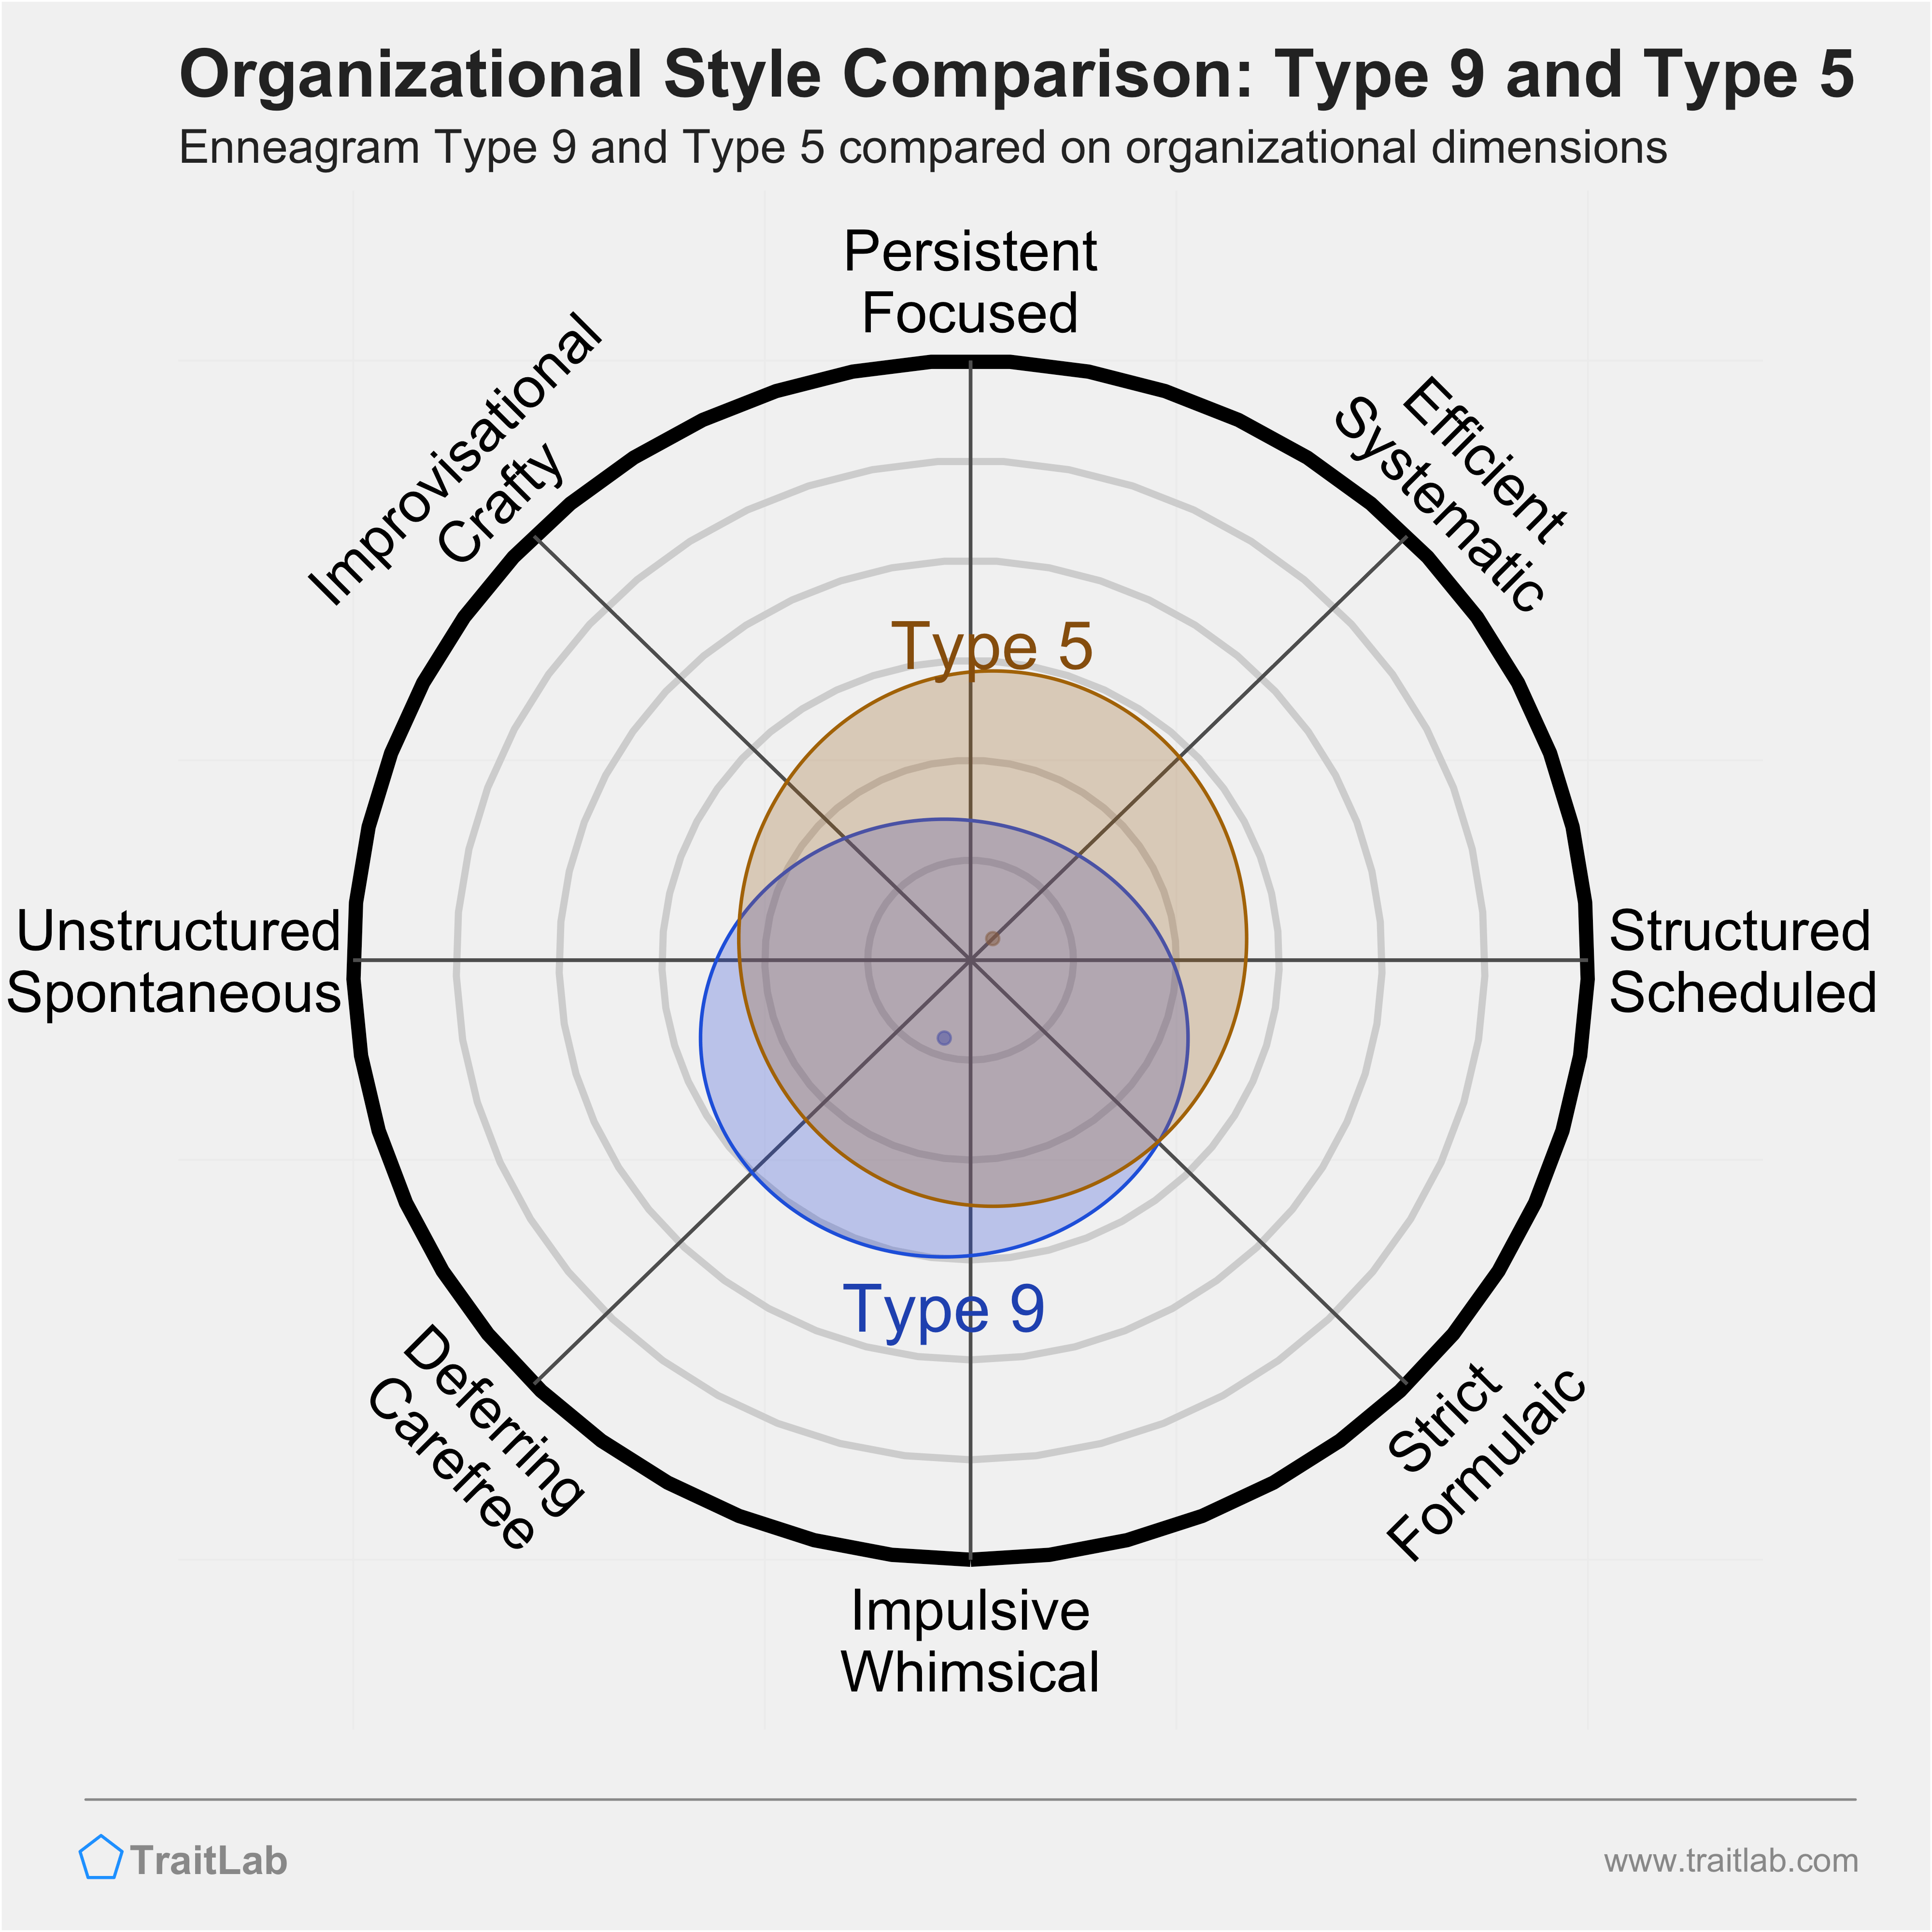 Type 9 and Type 5 comparison across organizational dimensions